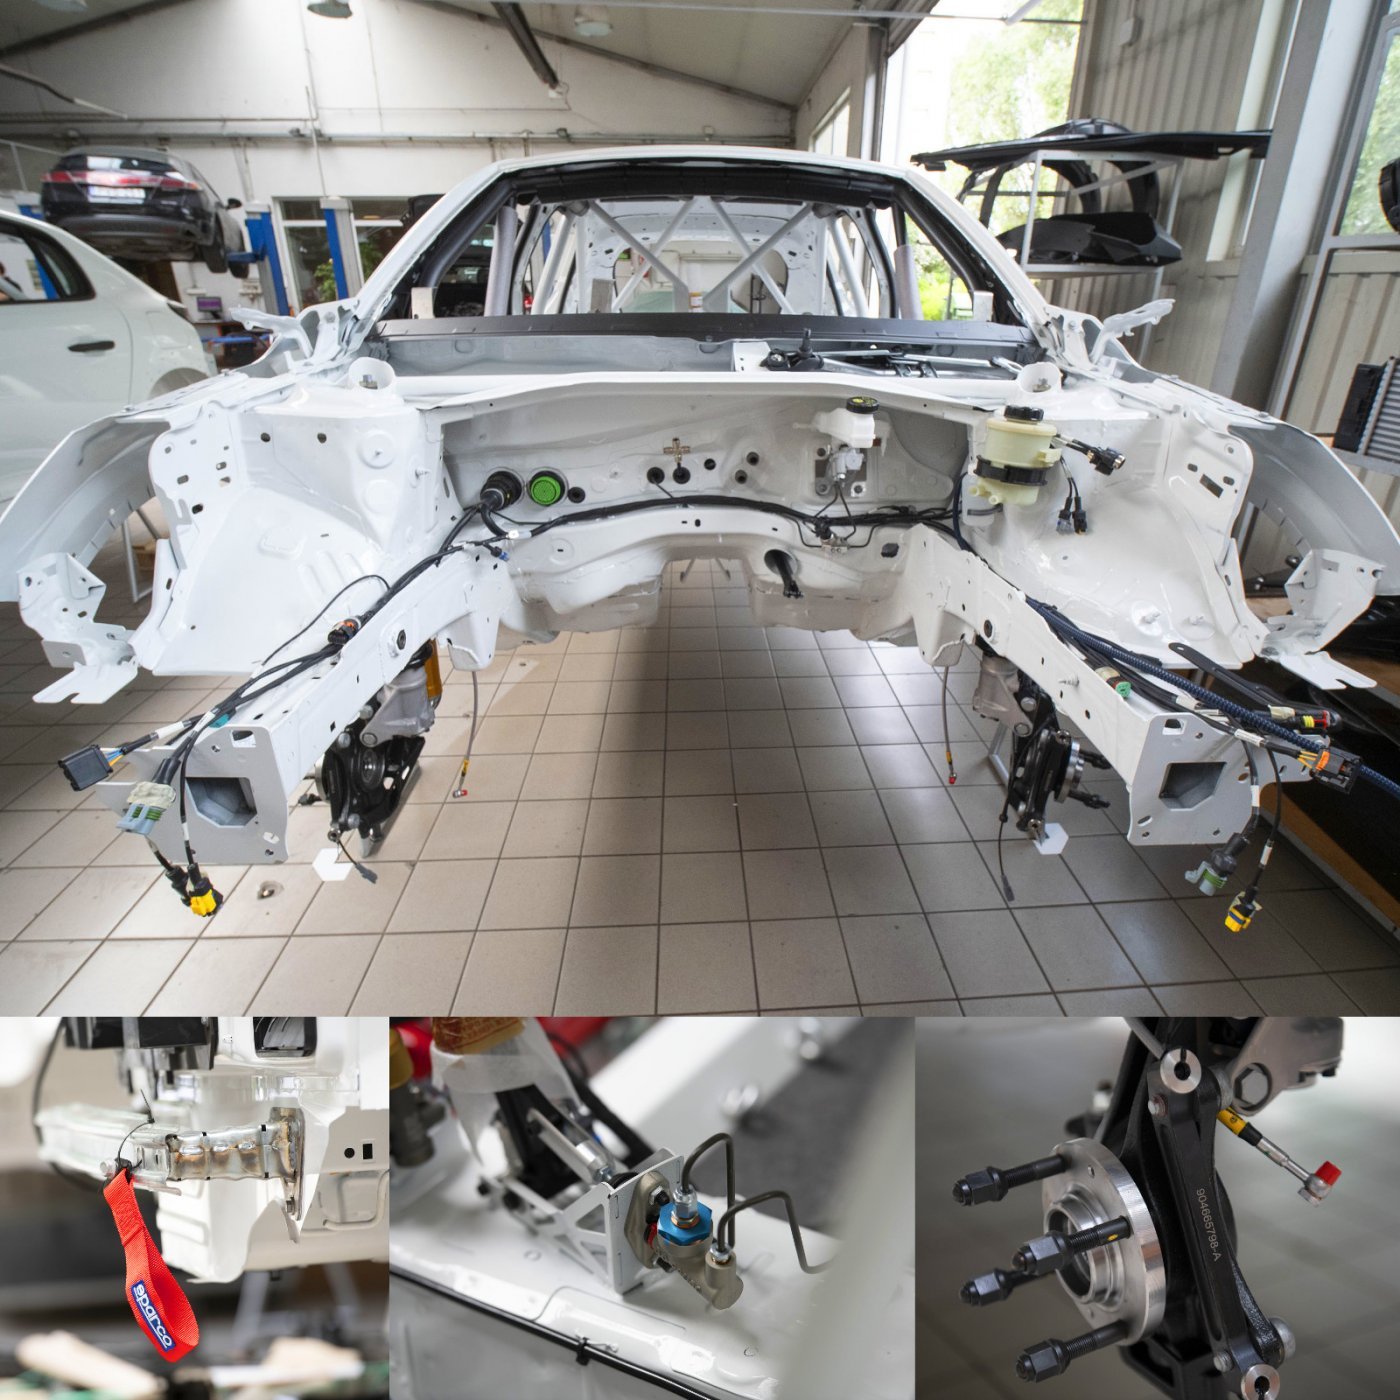 Peugeot rally cars - Car-Motor are being built in Portugal and Hungary